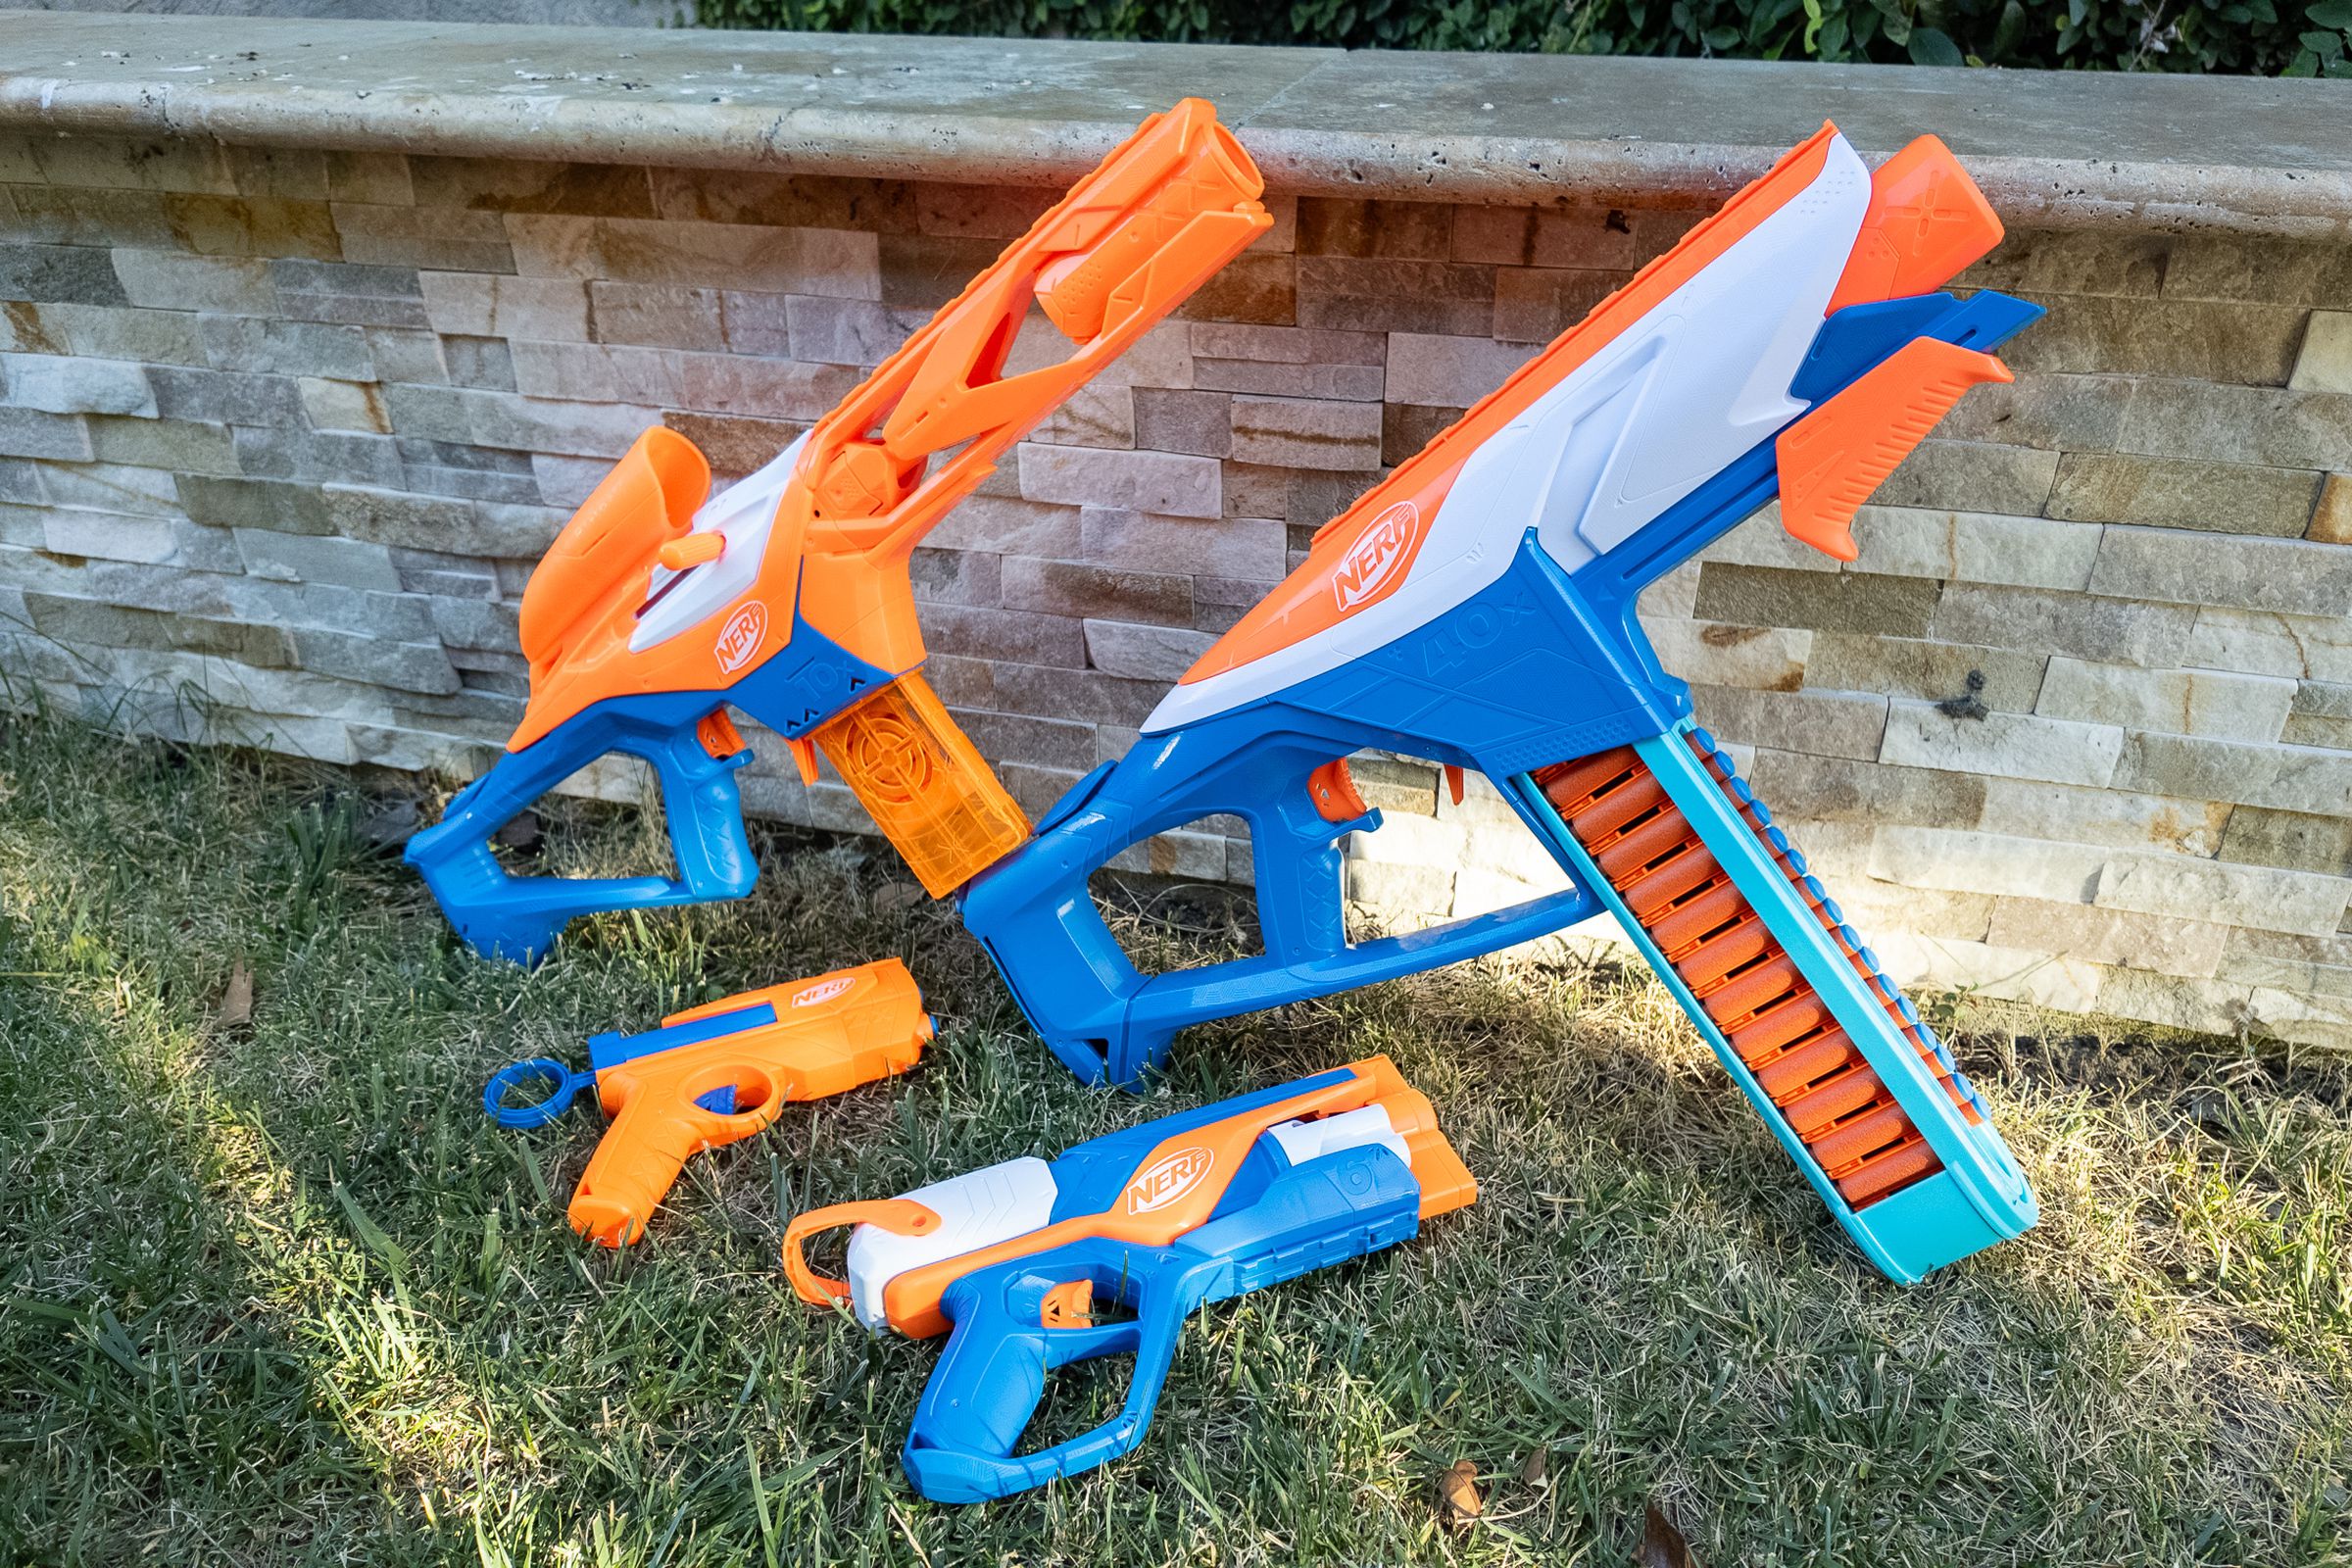 The first four Nerf N-Series blasters shipped to reviewers.